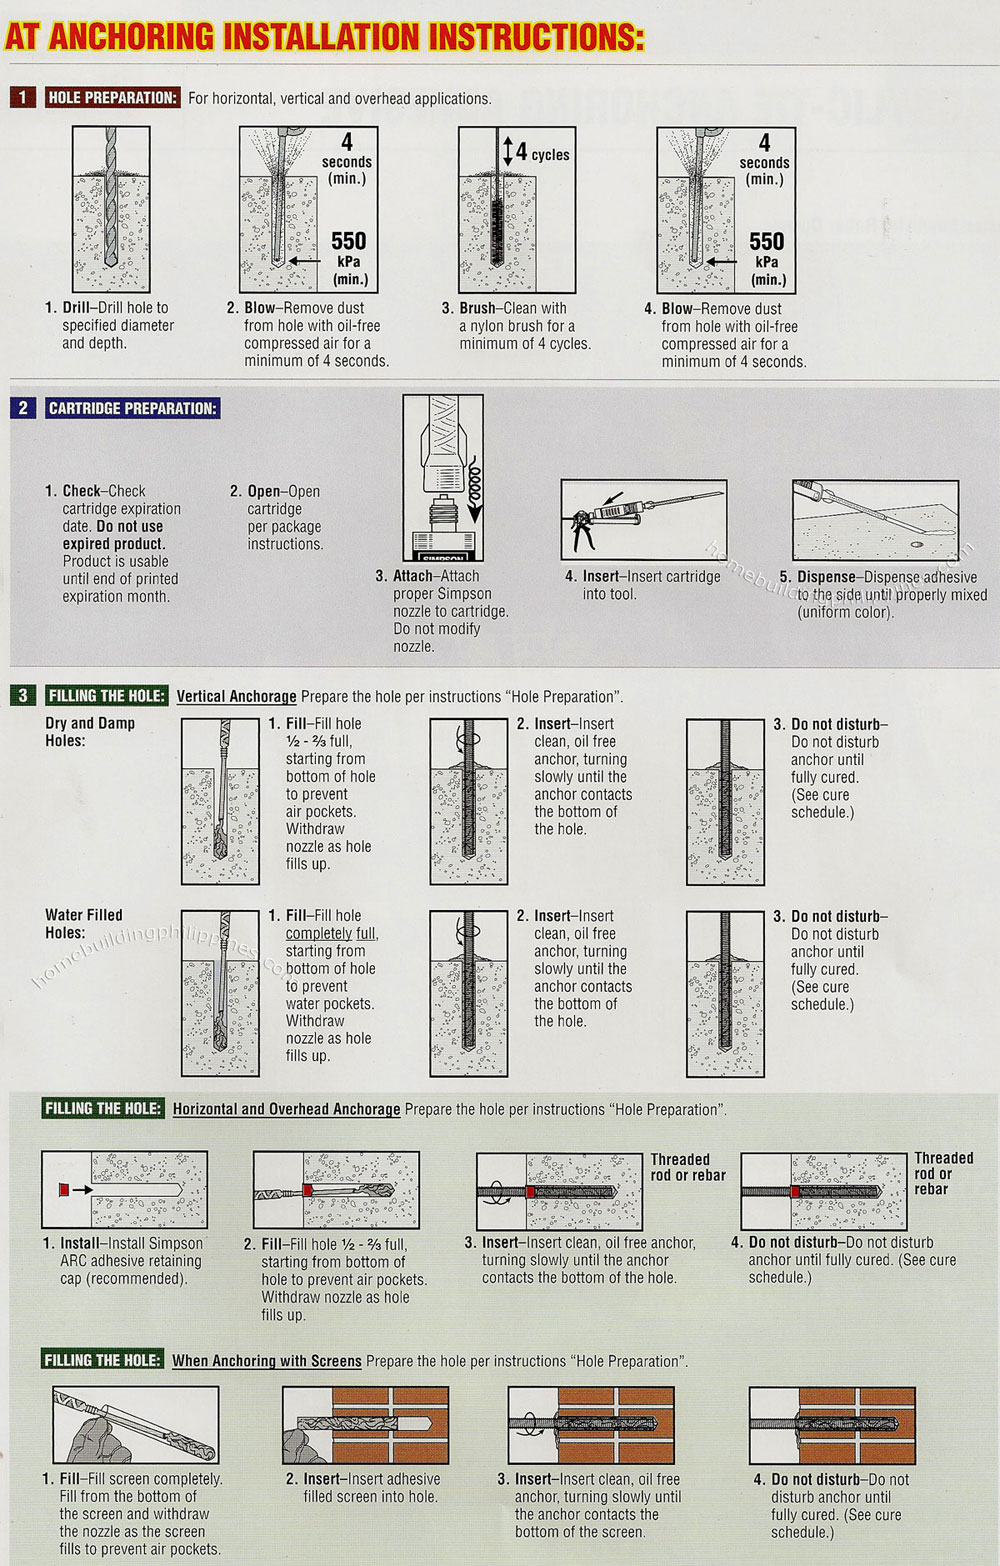 Simpson Acrylic-Tie Anchoring Installation Instructions